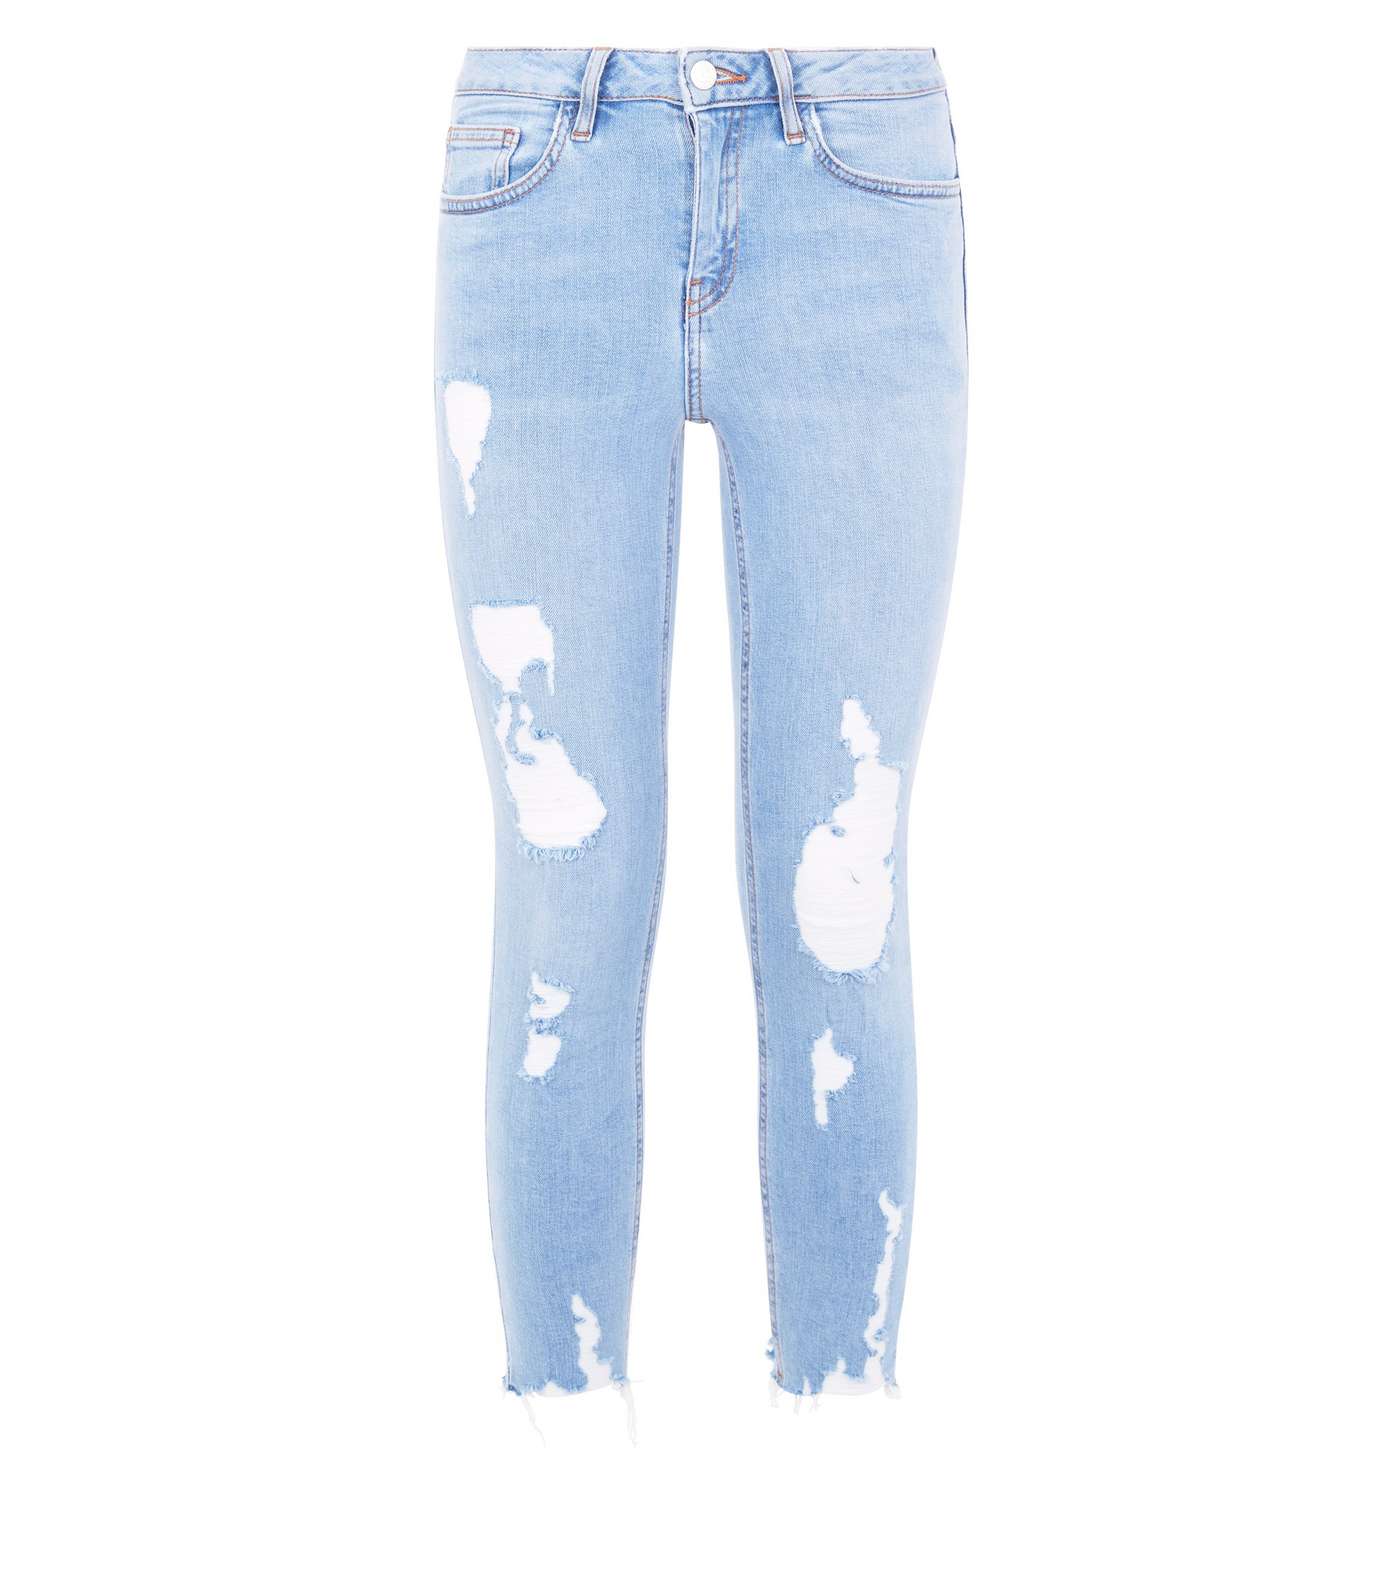 Girls Pale Blue Ripped Skinny Jeans Image 4